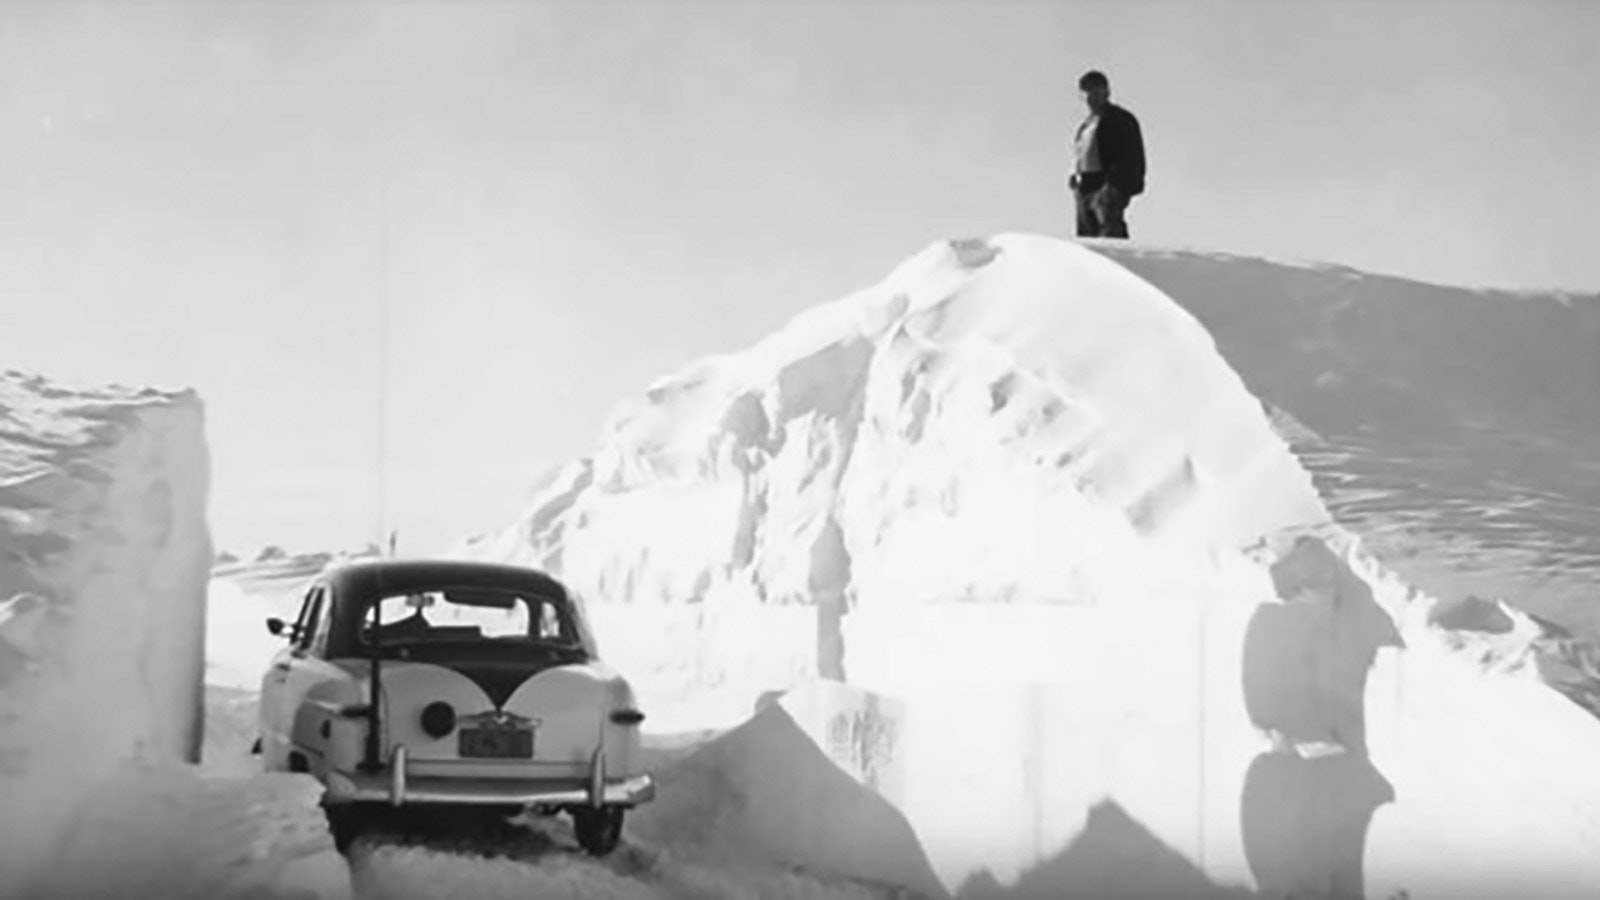 75 Years Ago, The Blizzard of 1949 Crippled Wyoming